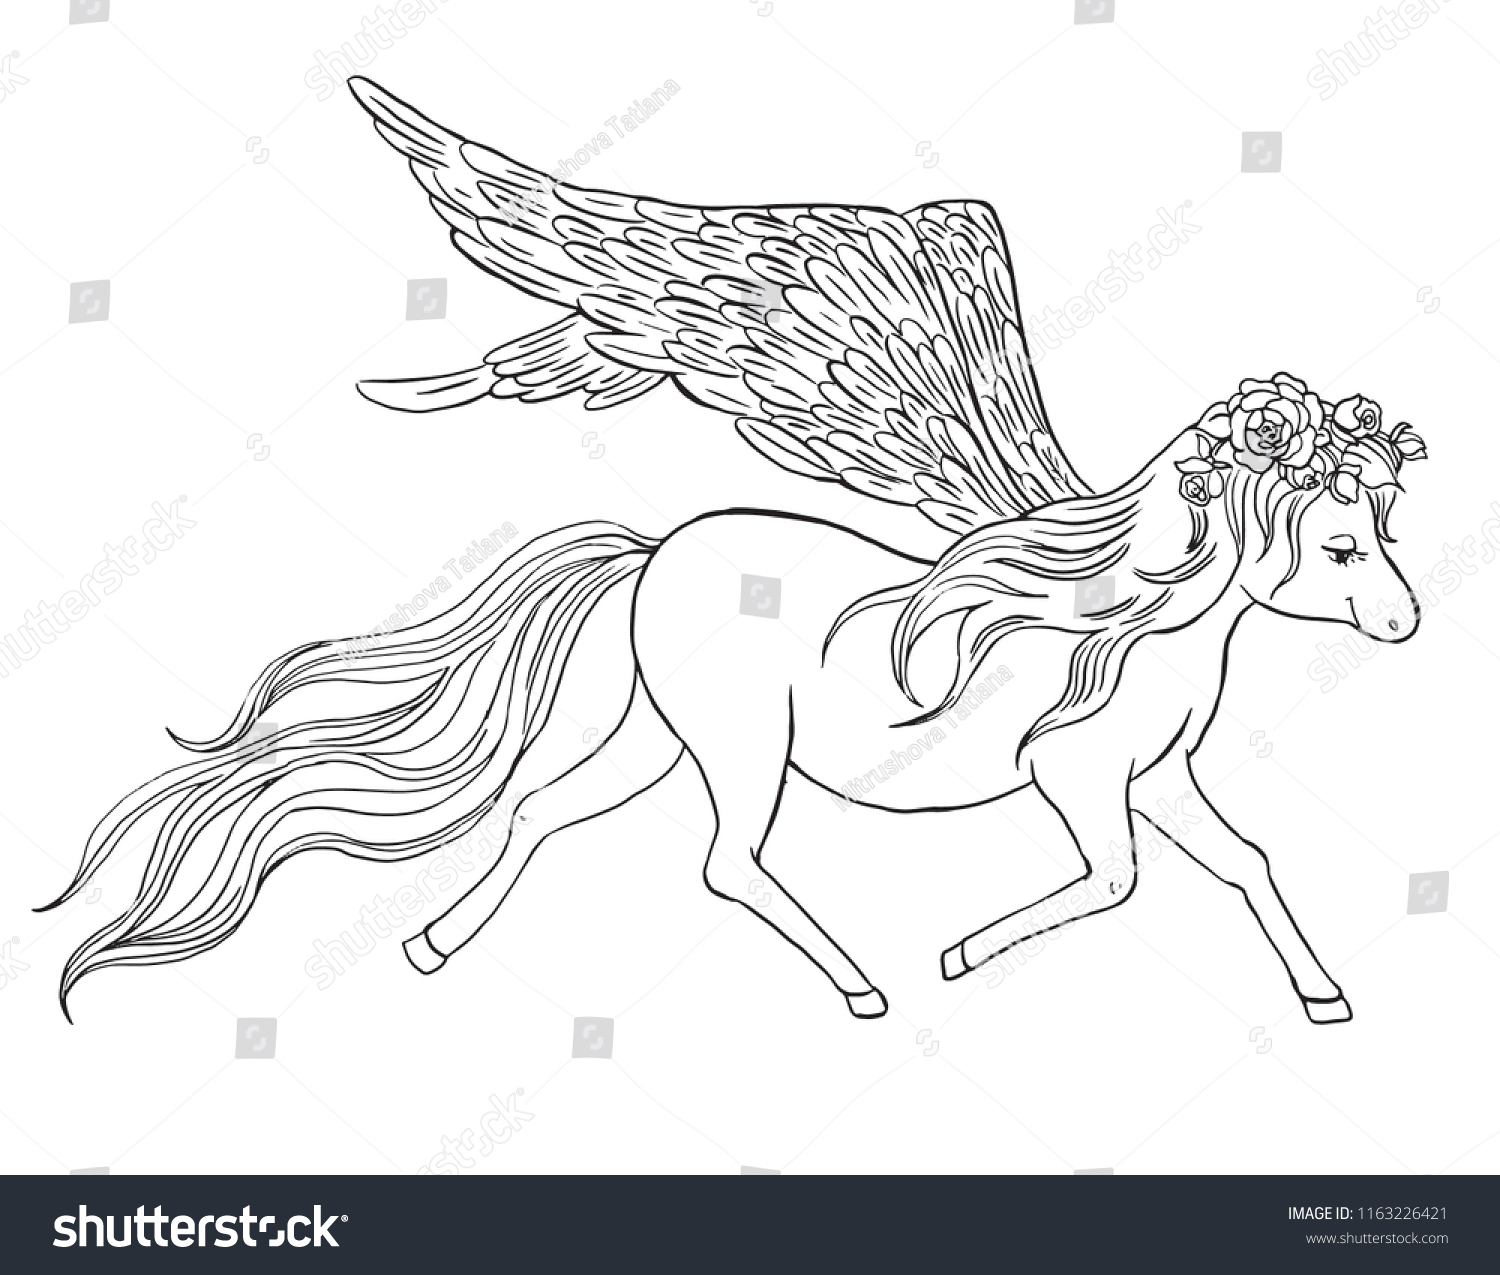 Flying Pegasus Coloring Page Kids Stock Vector Royalty Free ...